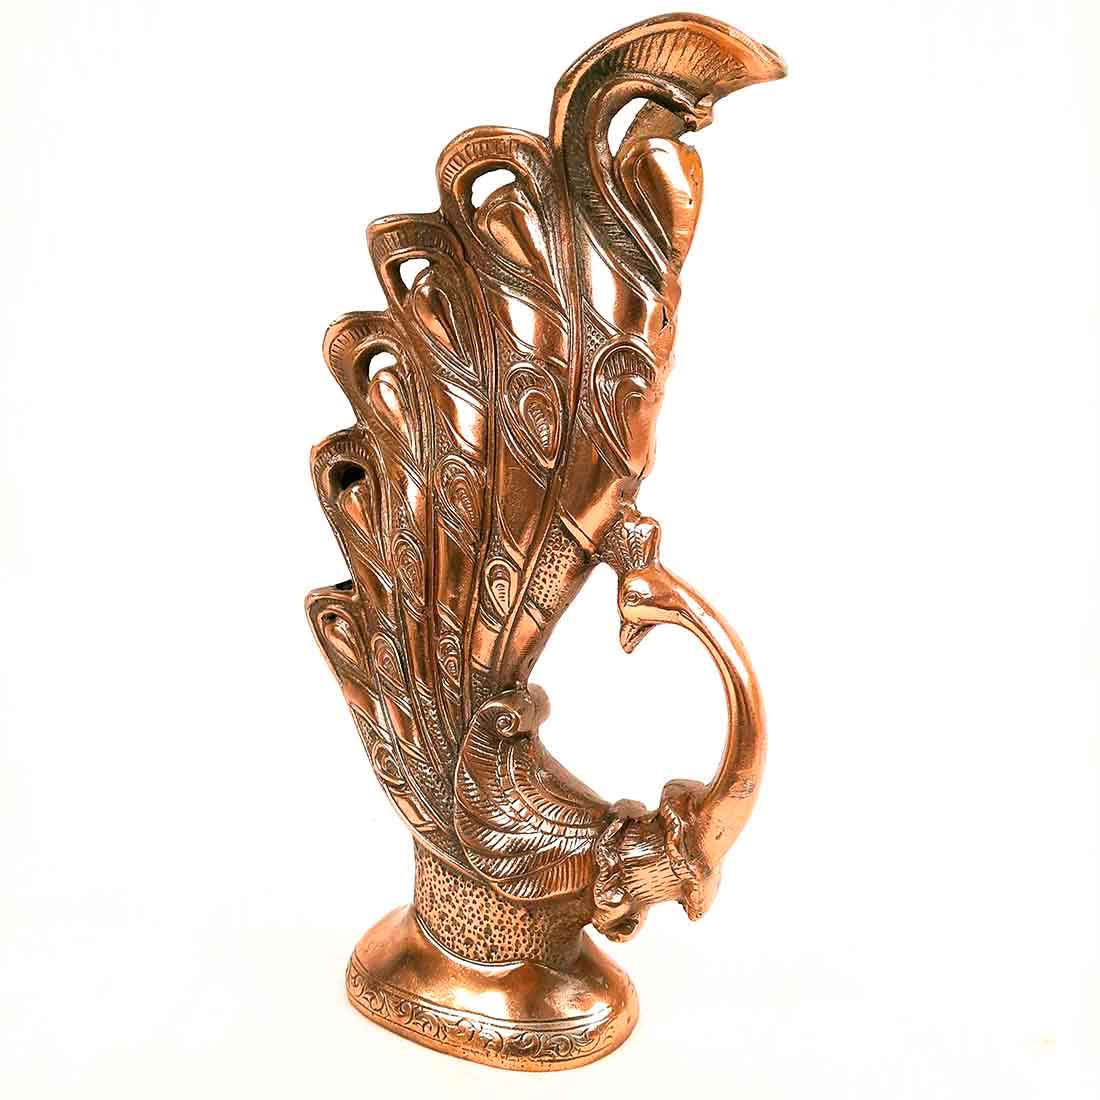 Vase | Flower Pot | Showpiece Cum Vase - Peacock Design - for Home Decoration, Living Room, Table, Shelf, Office , Interior Decor | Gifts for All Occasions - 16 Inch